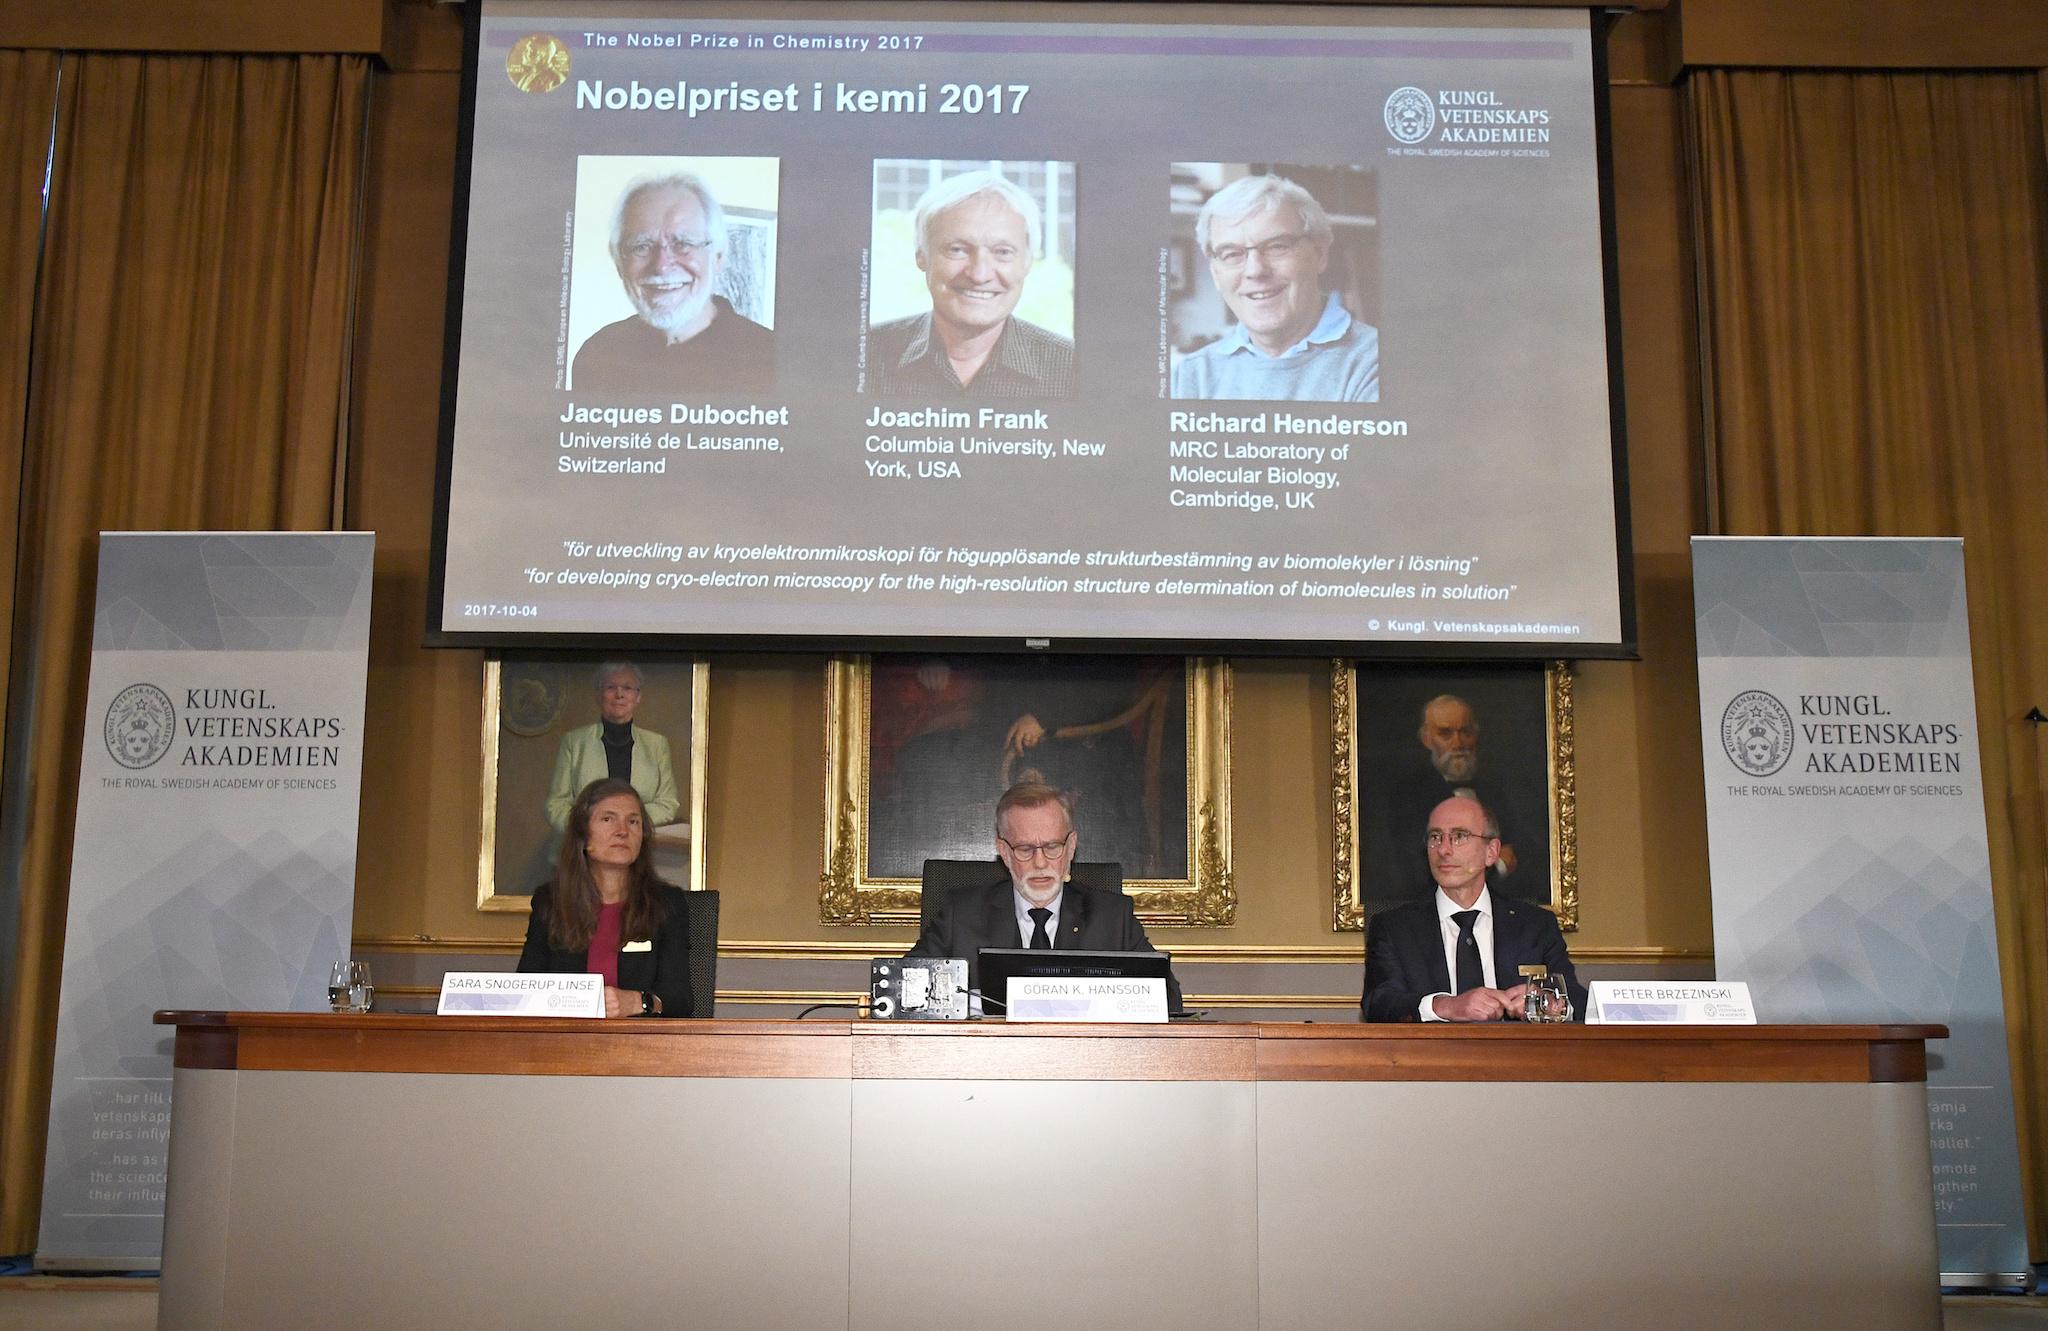 Gunnar von Heijne (C), Secretary of the Nobel Committee for Chemistry 2017, Sara Snogerup Linse, Chair of the Nobel Committee for Chemistry 2017 and Peter Brzezinski, Professor of Biochemistry, announce the winners of the 2017 Nobel Prize in Chemistry during a press conference in Stockholm, Sweden, October 4, 2017